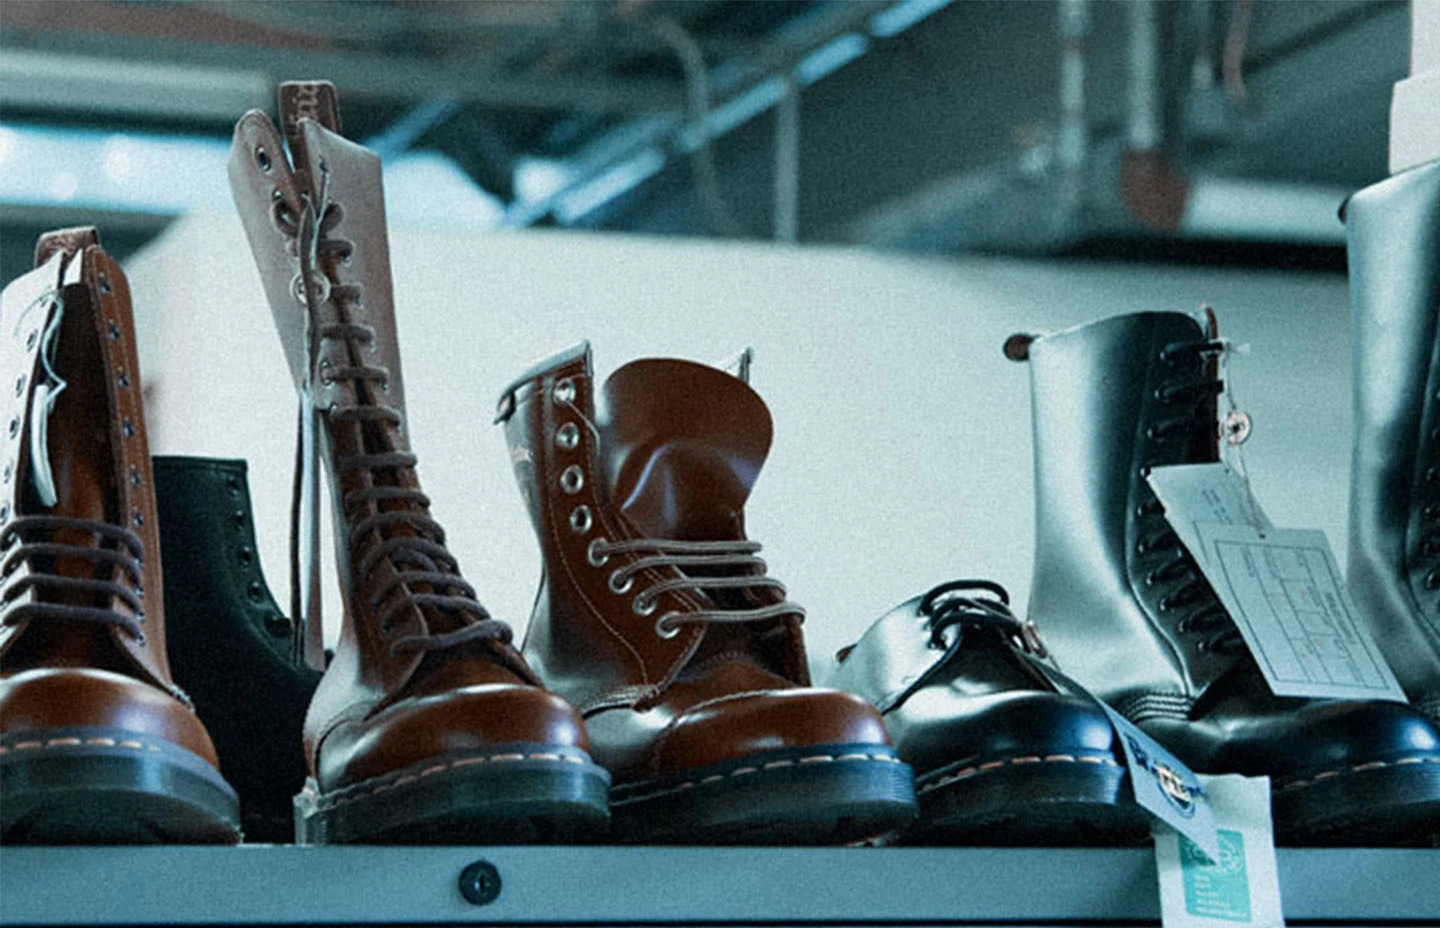 Collection of Dr Martens boots for sale on a shelf